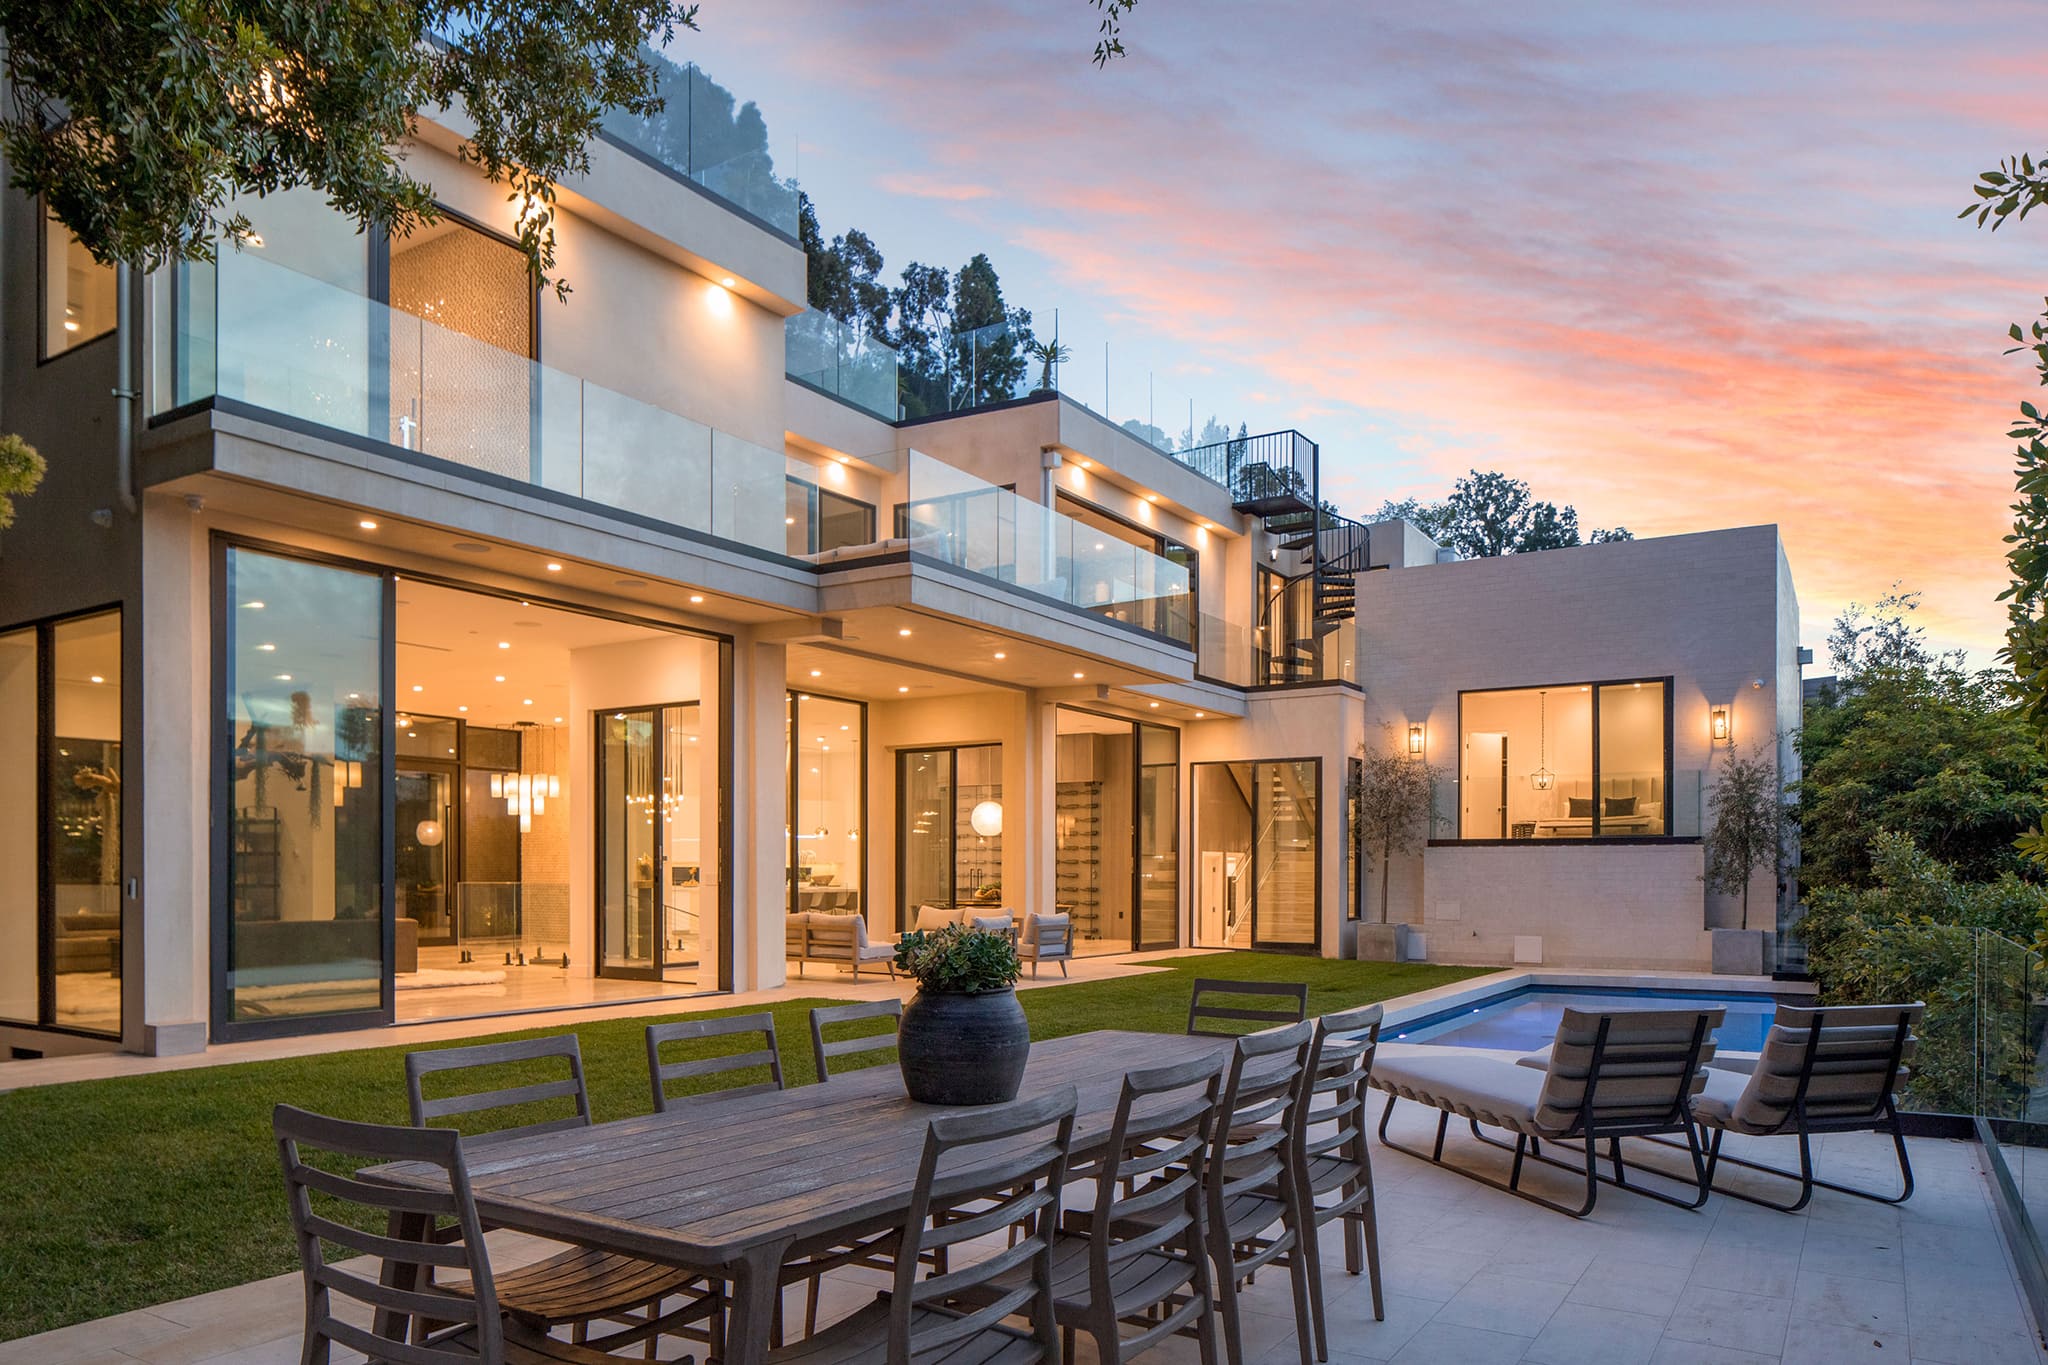 Brooklyn Beckham and Nicola Peltz's 7,700 square-foot mansion has five bedrooms, five bathrooms, an infinity pool, and more